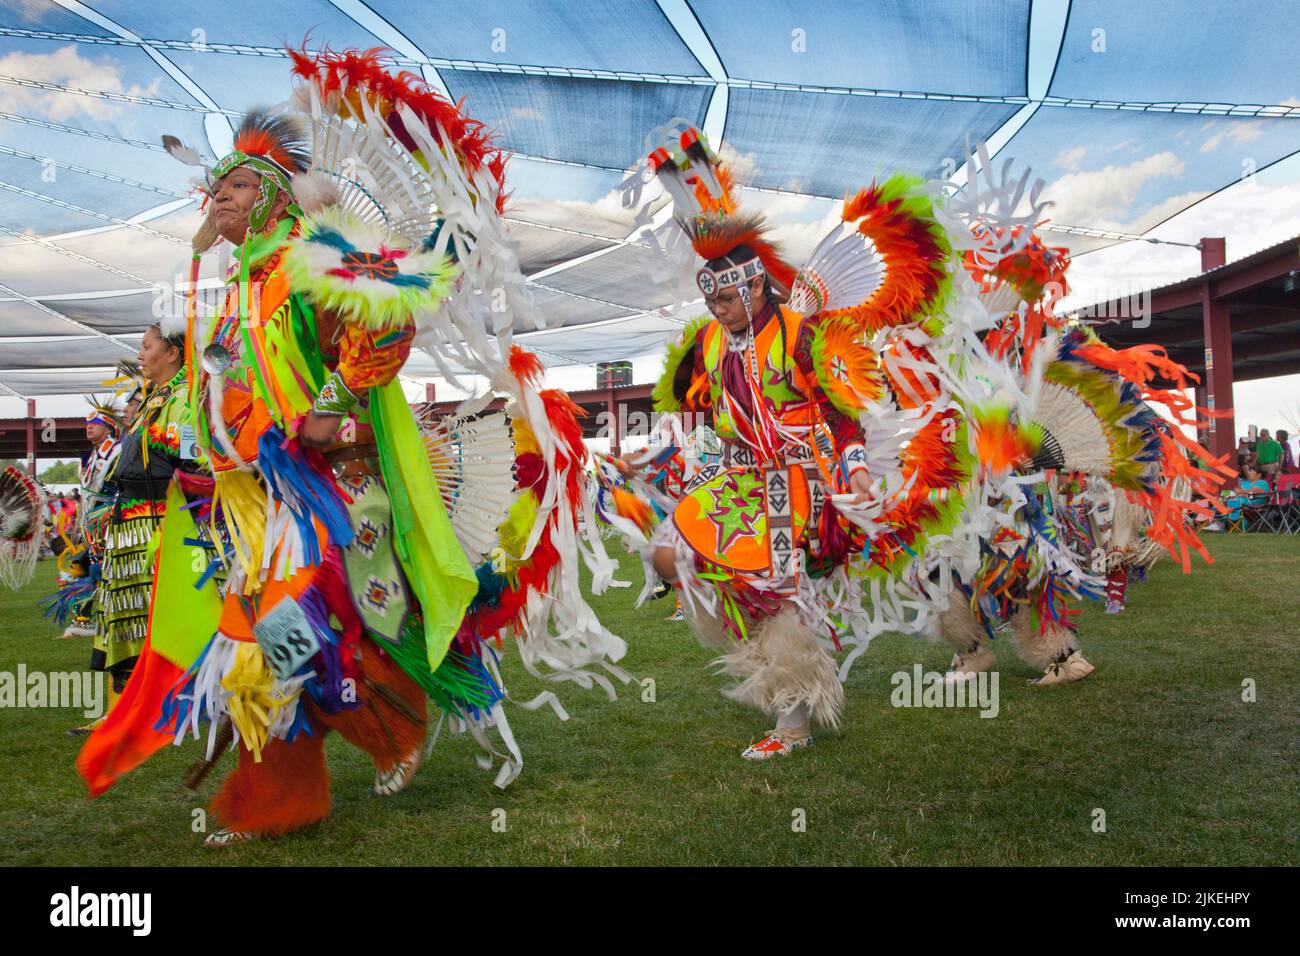 Men's traditional fancy dancers in colorful regalia at the Shoshone